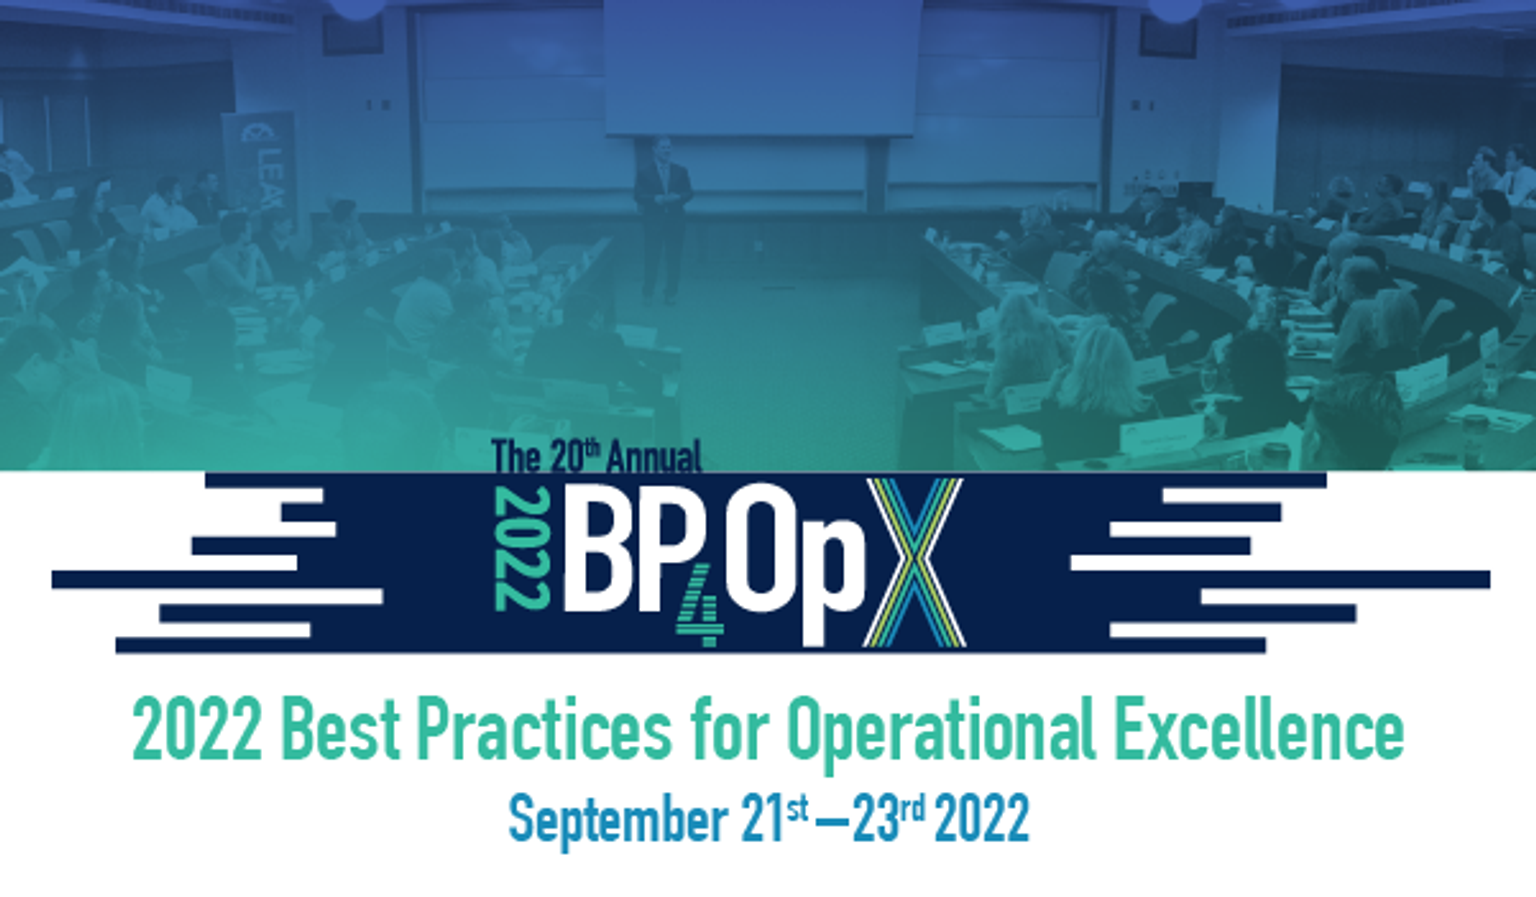 2022 Best Practices for Operational Excellence, September 21st - 23rd